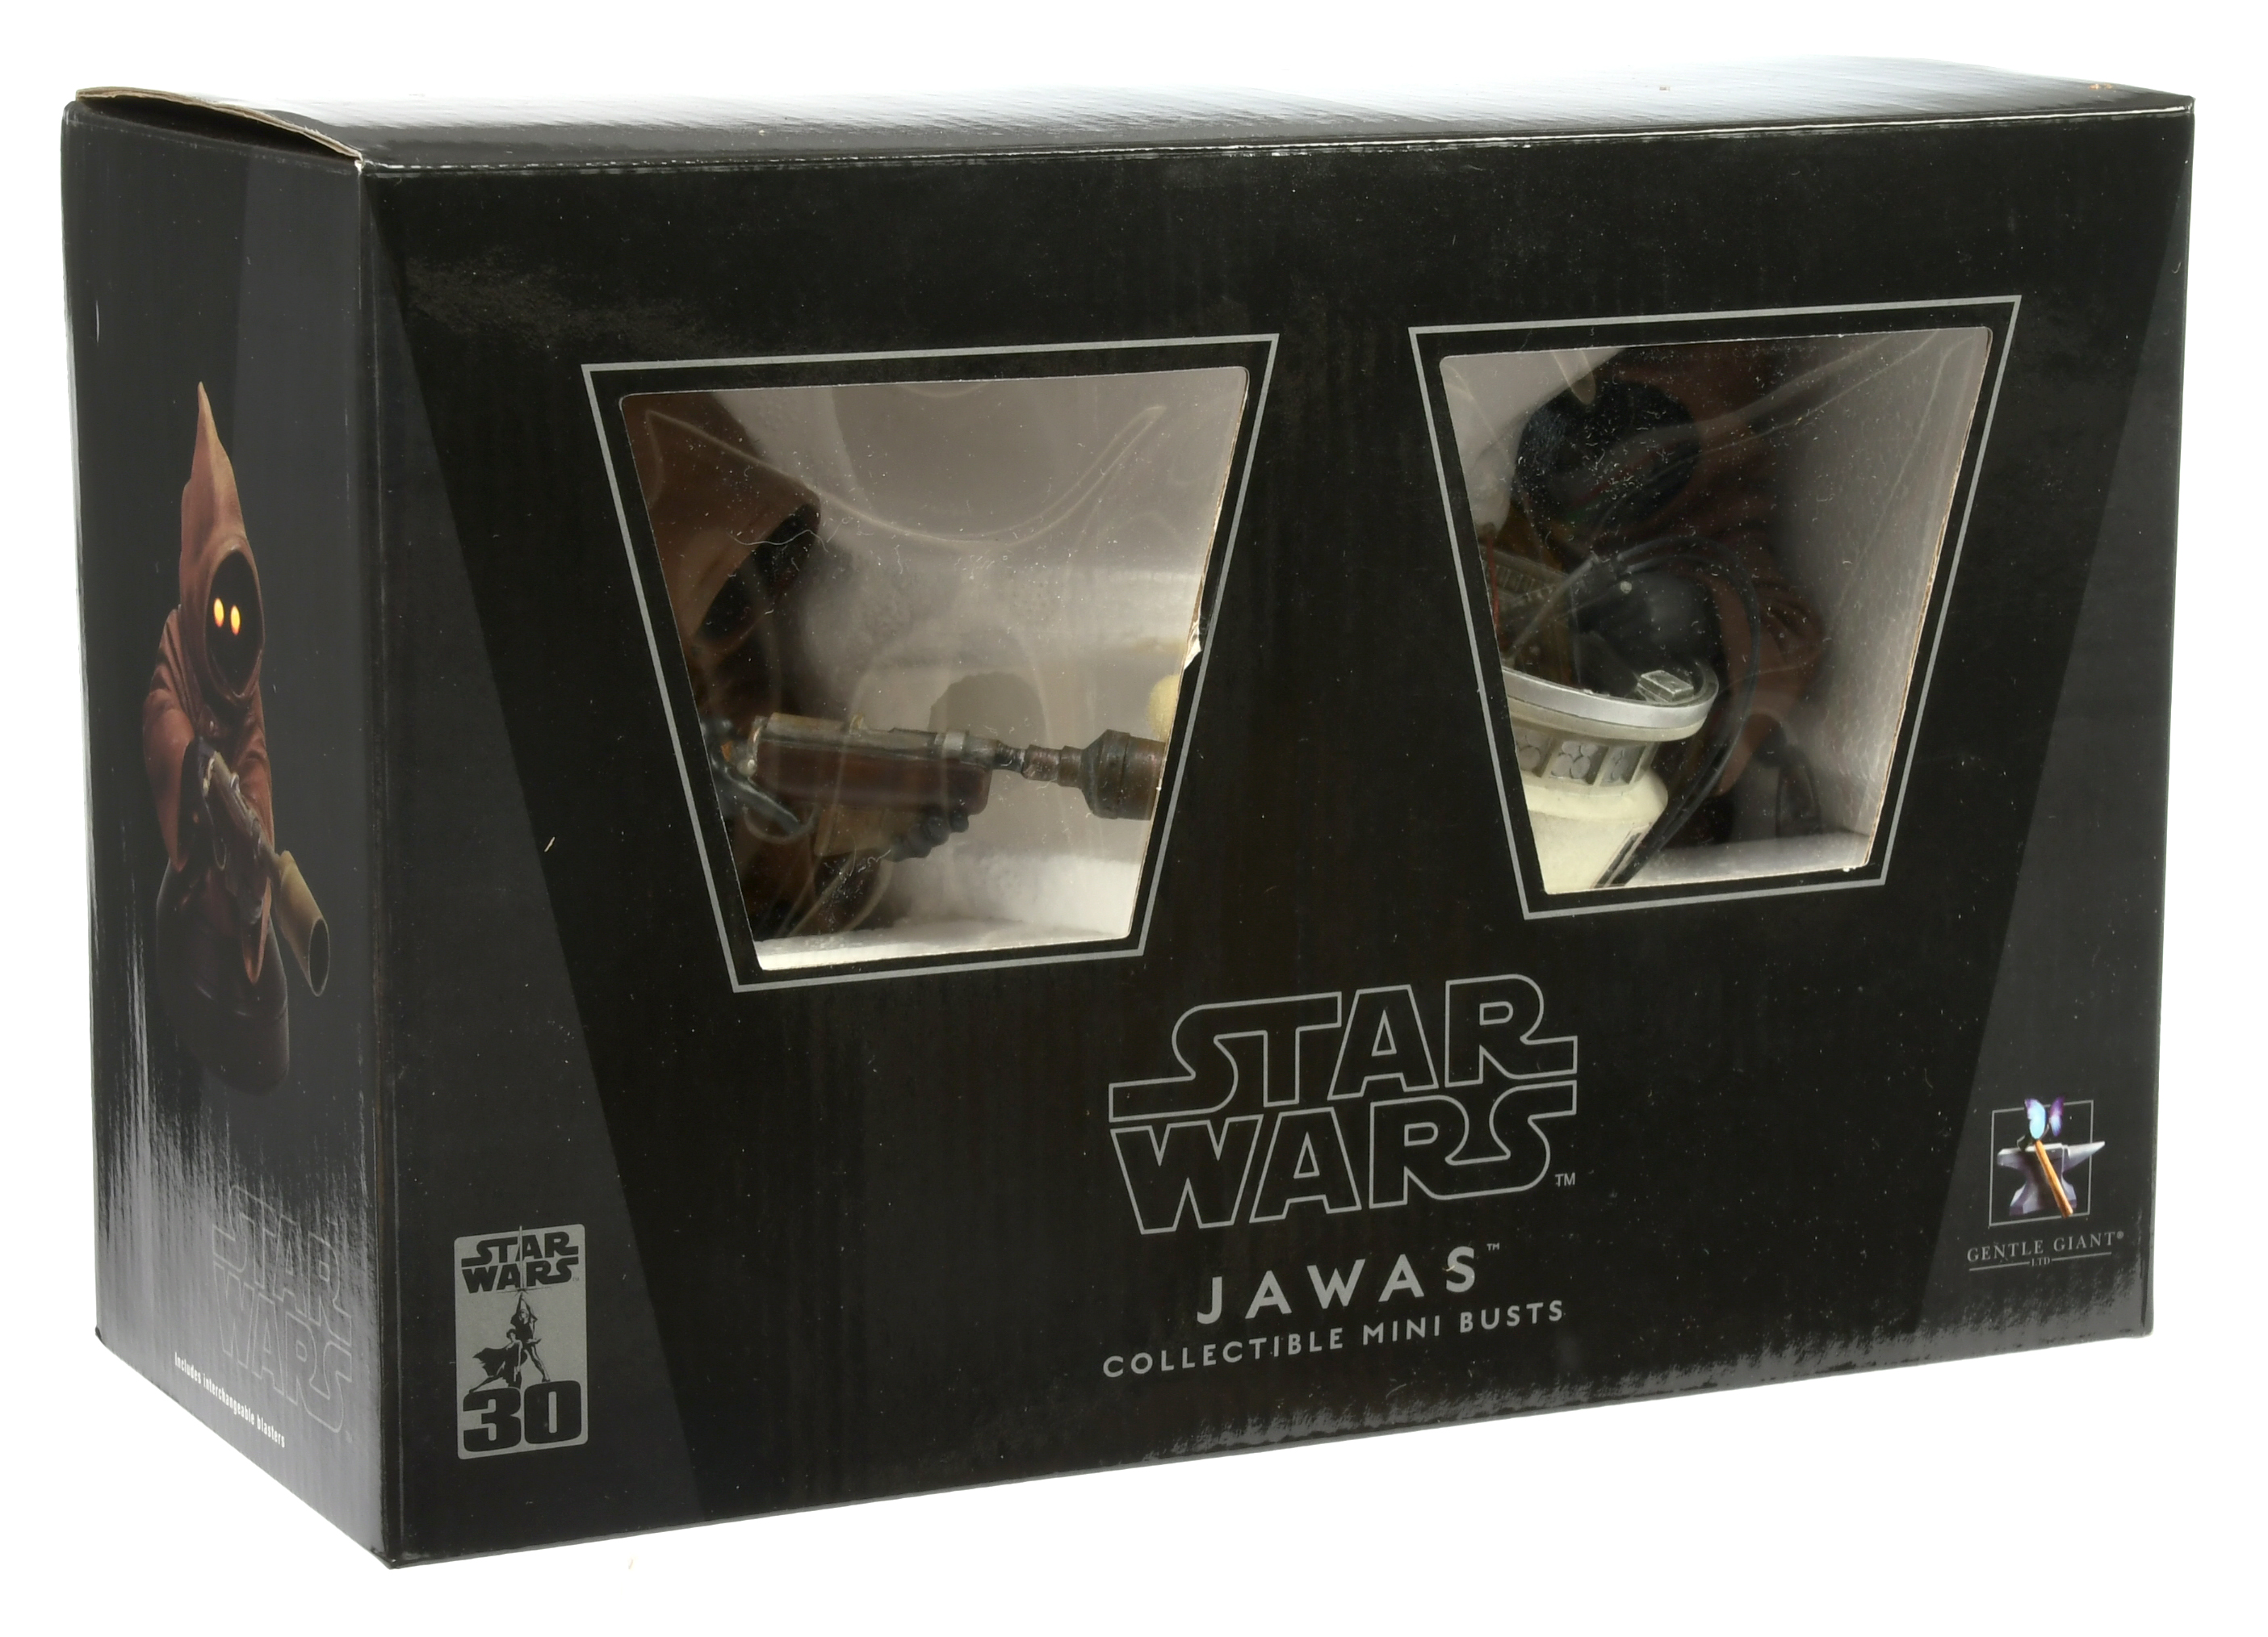 Gentle Giant Star Wars Jawas collectible mini bust